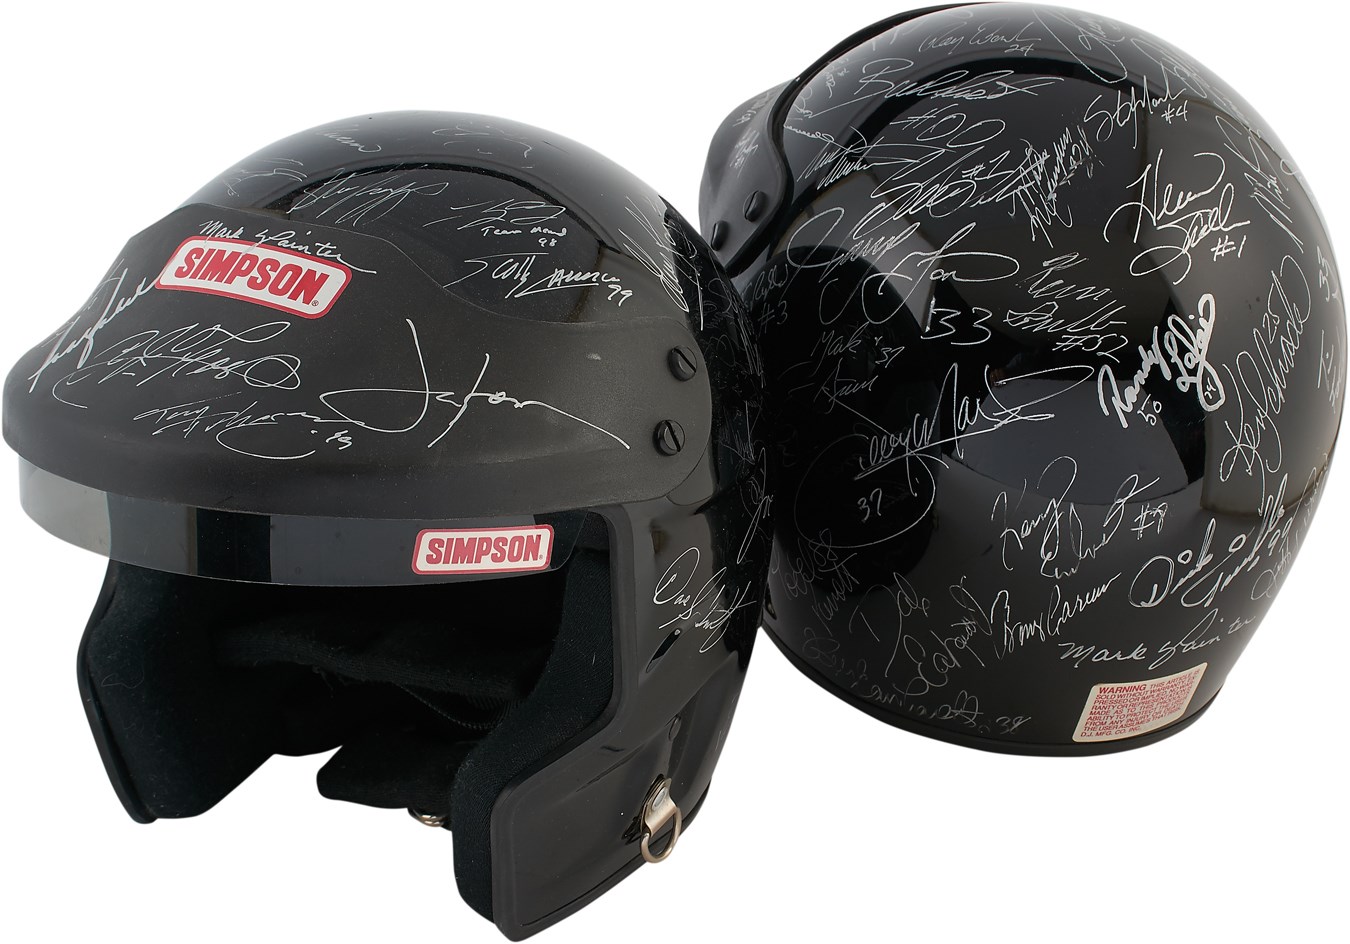 - NASCAR Stars of Past and Present Signed Helmets